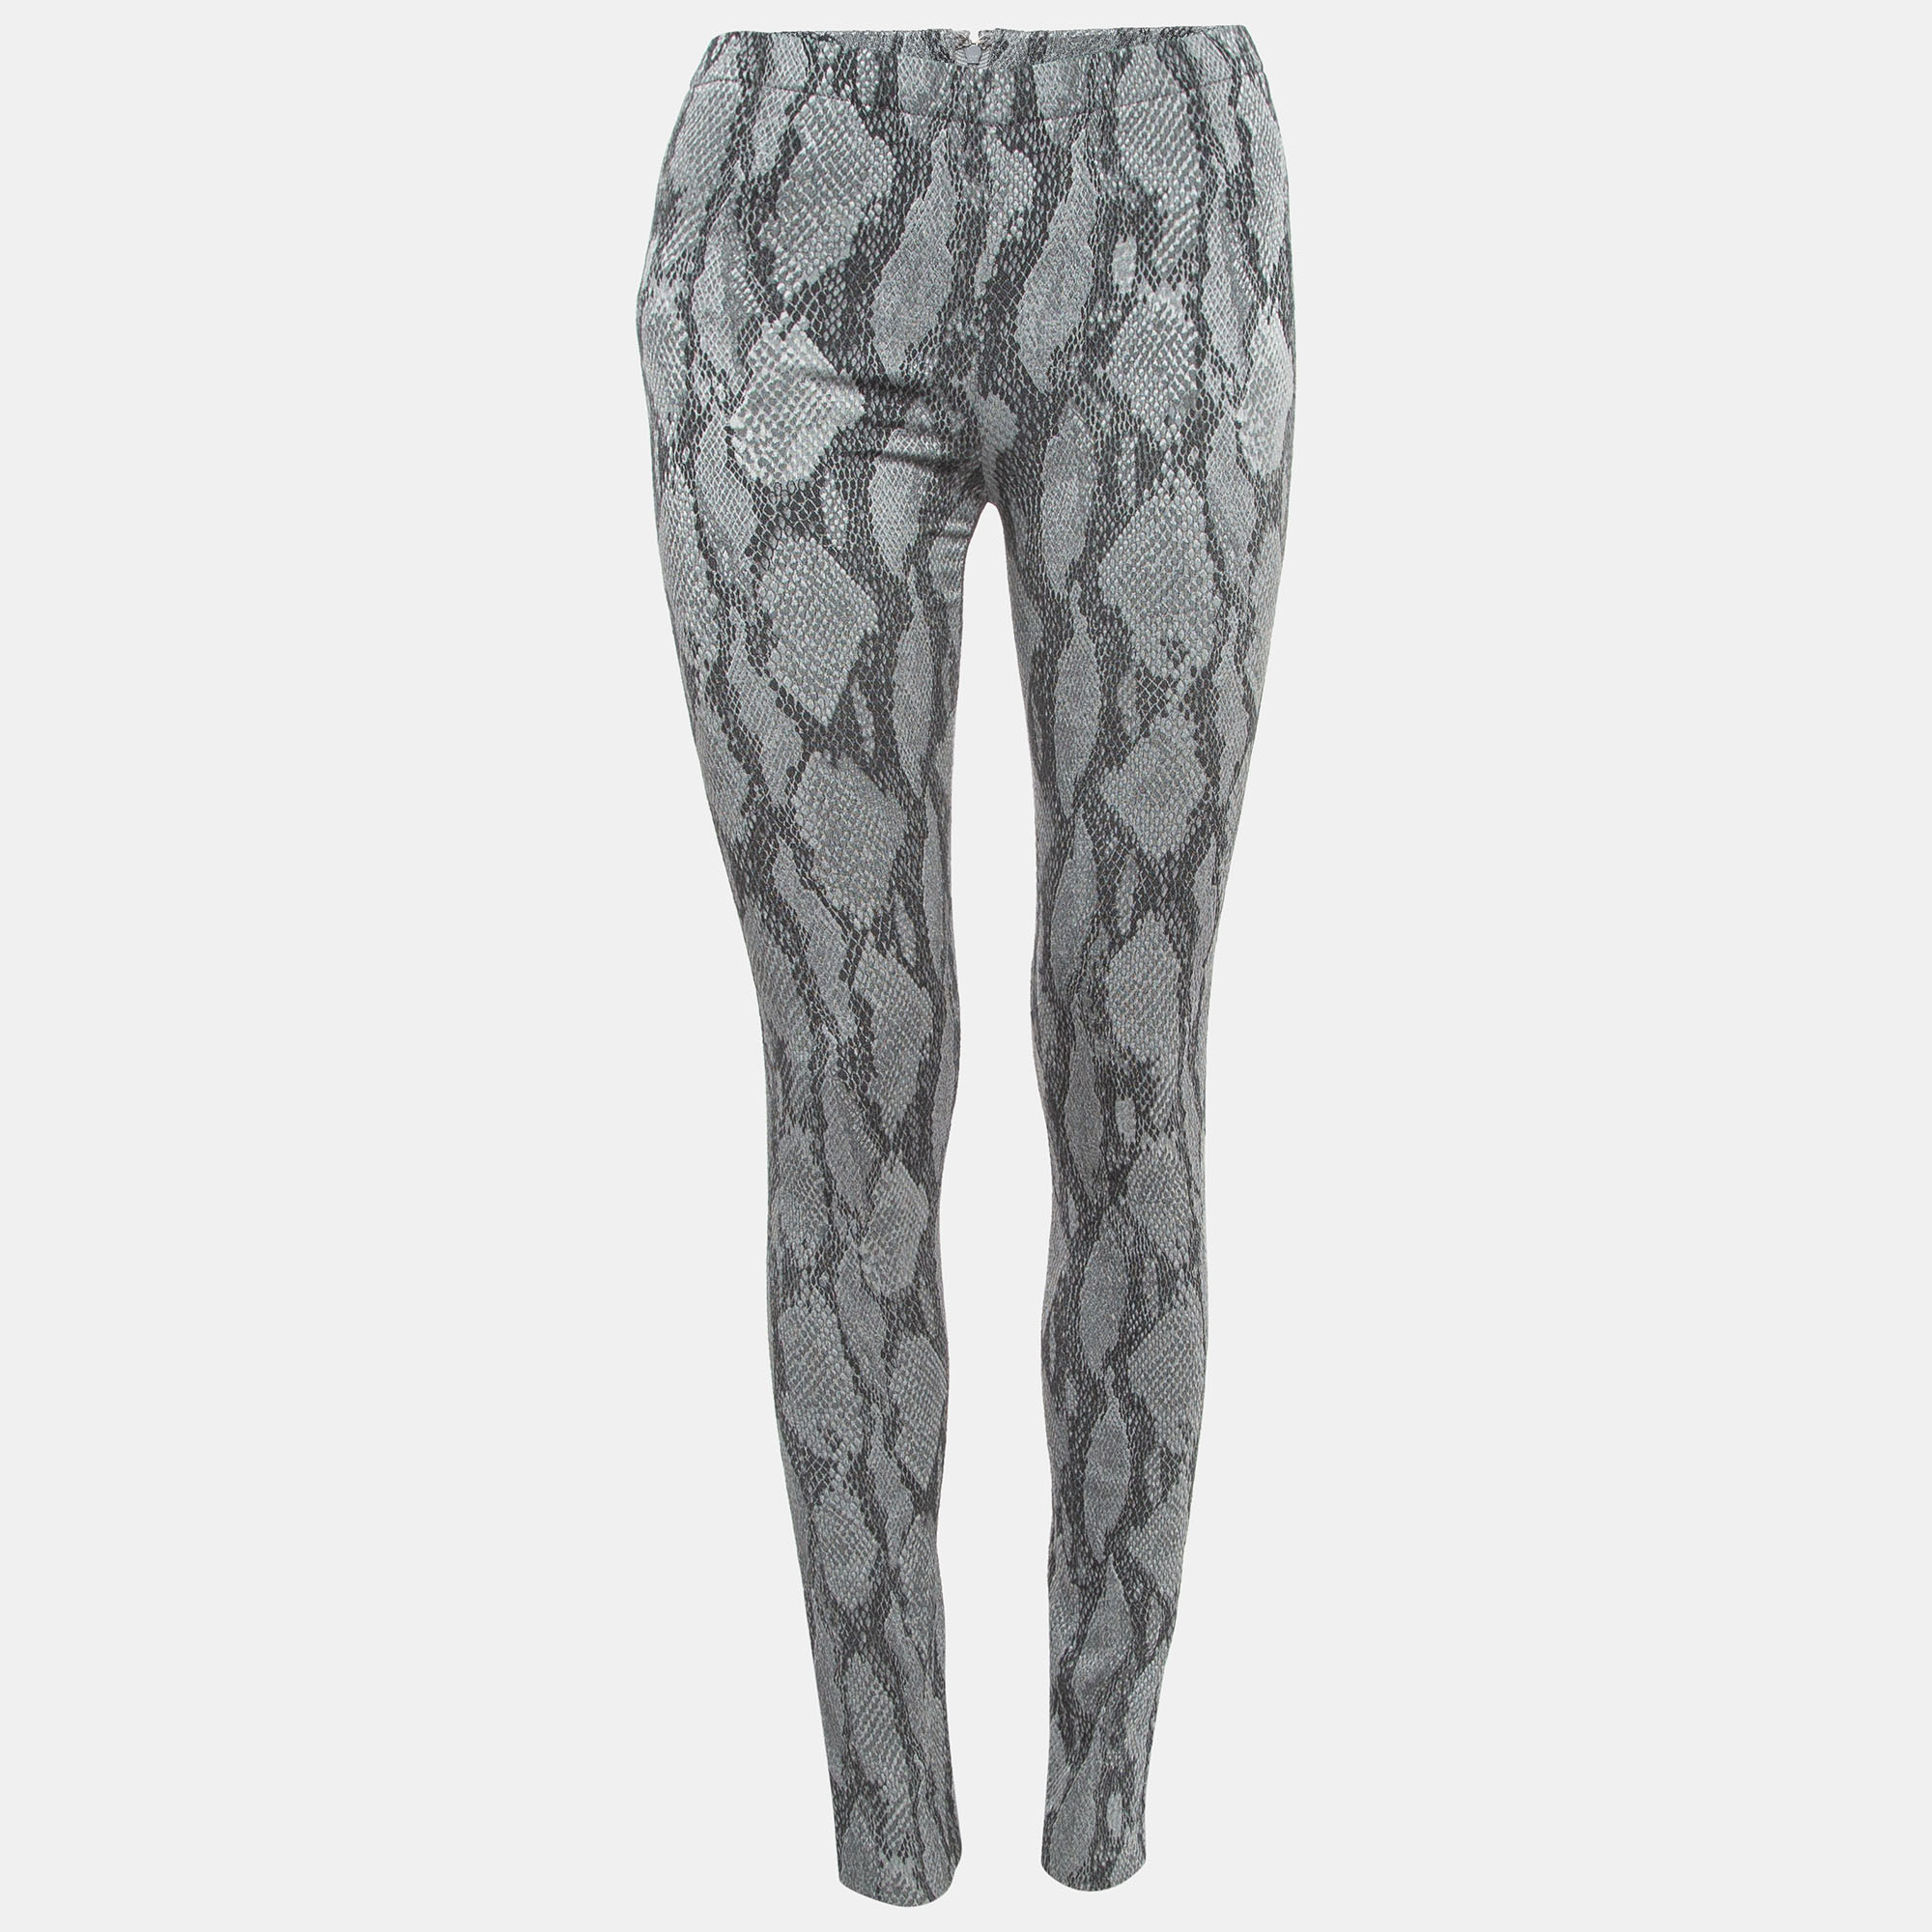 Zadig & voltaire grey snake printed textured knit leggings m